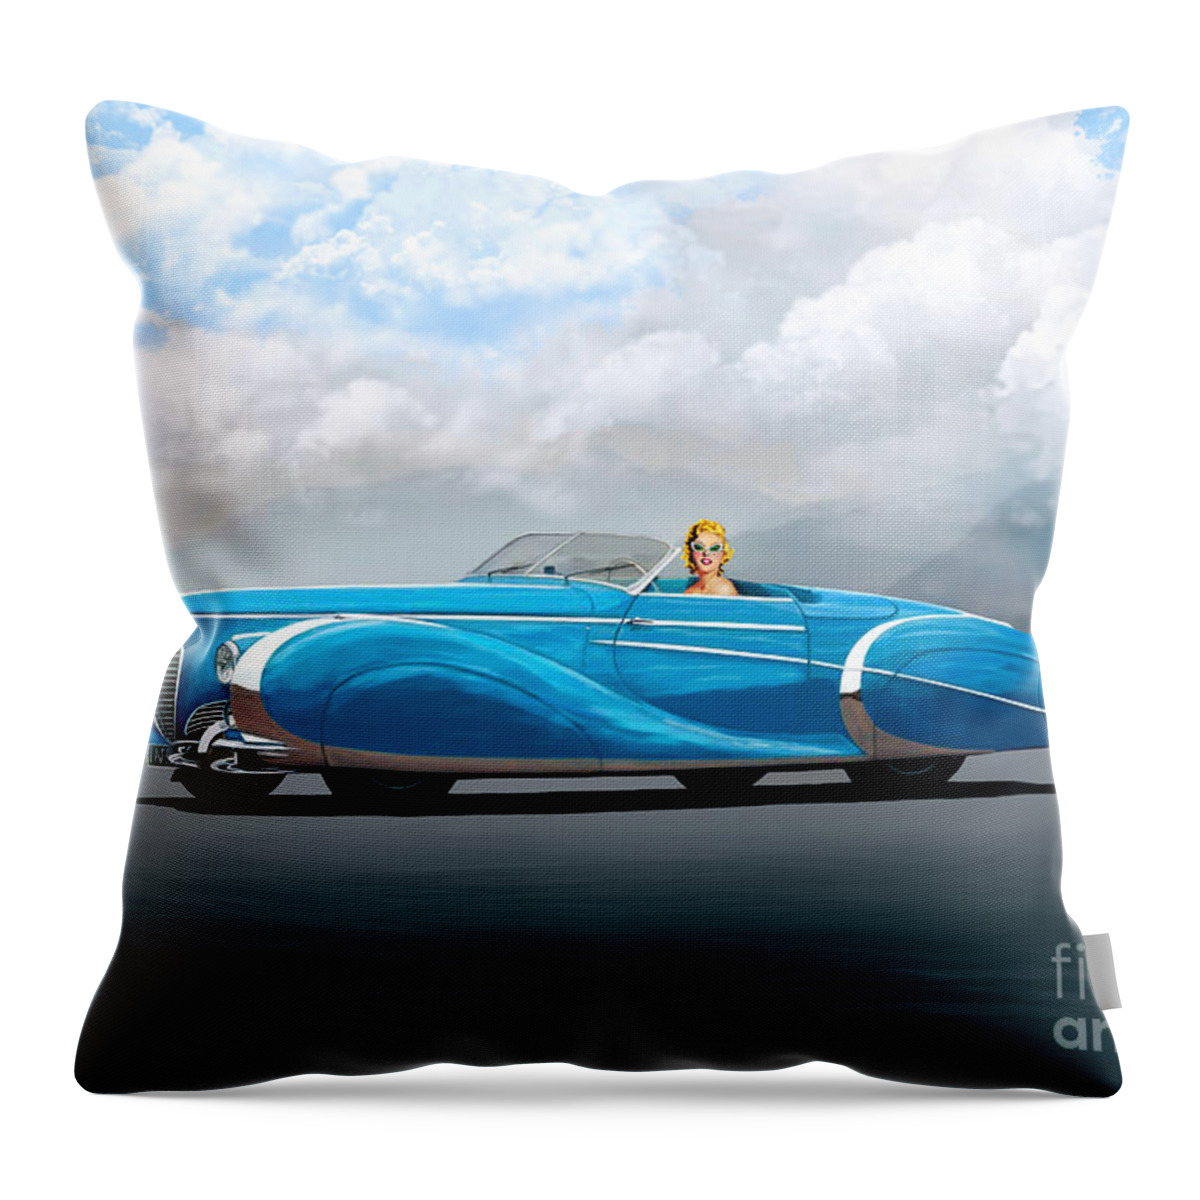 Blondes Throw Pillow featuring the digital art Blondes Have More Fun by Alan Greene